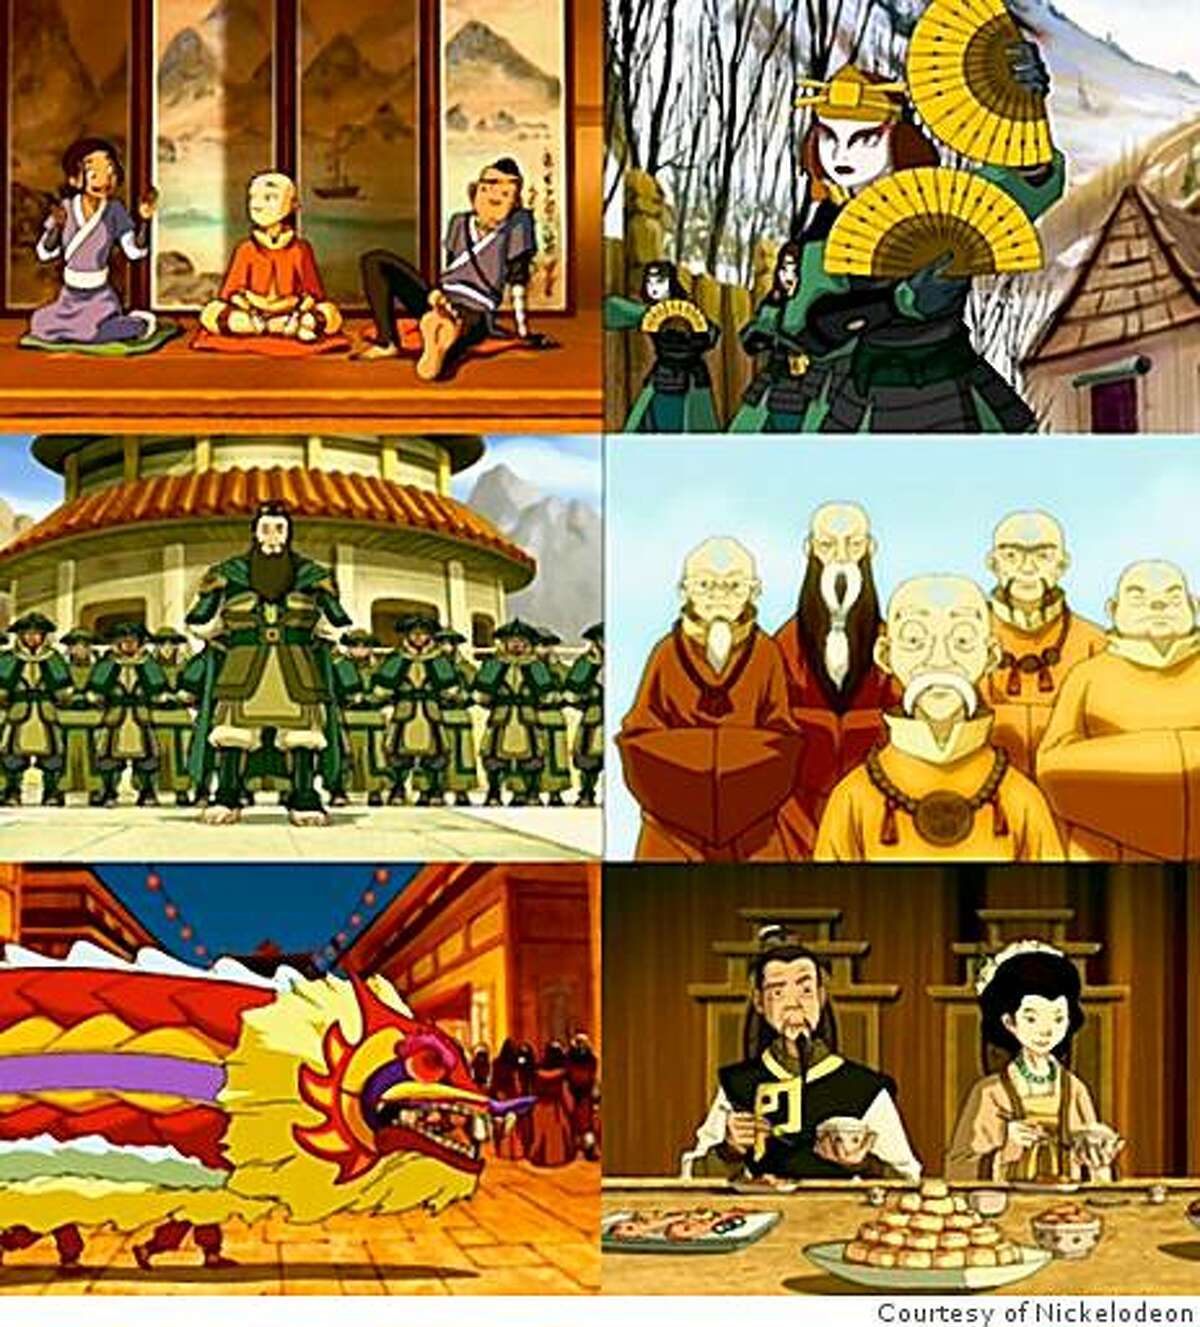 Assorted scenes from the animated series, "Avatar: The Last Airbender." Asian or not? You decide.